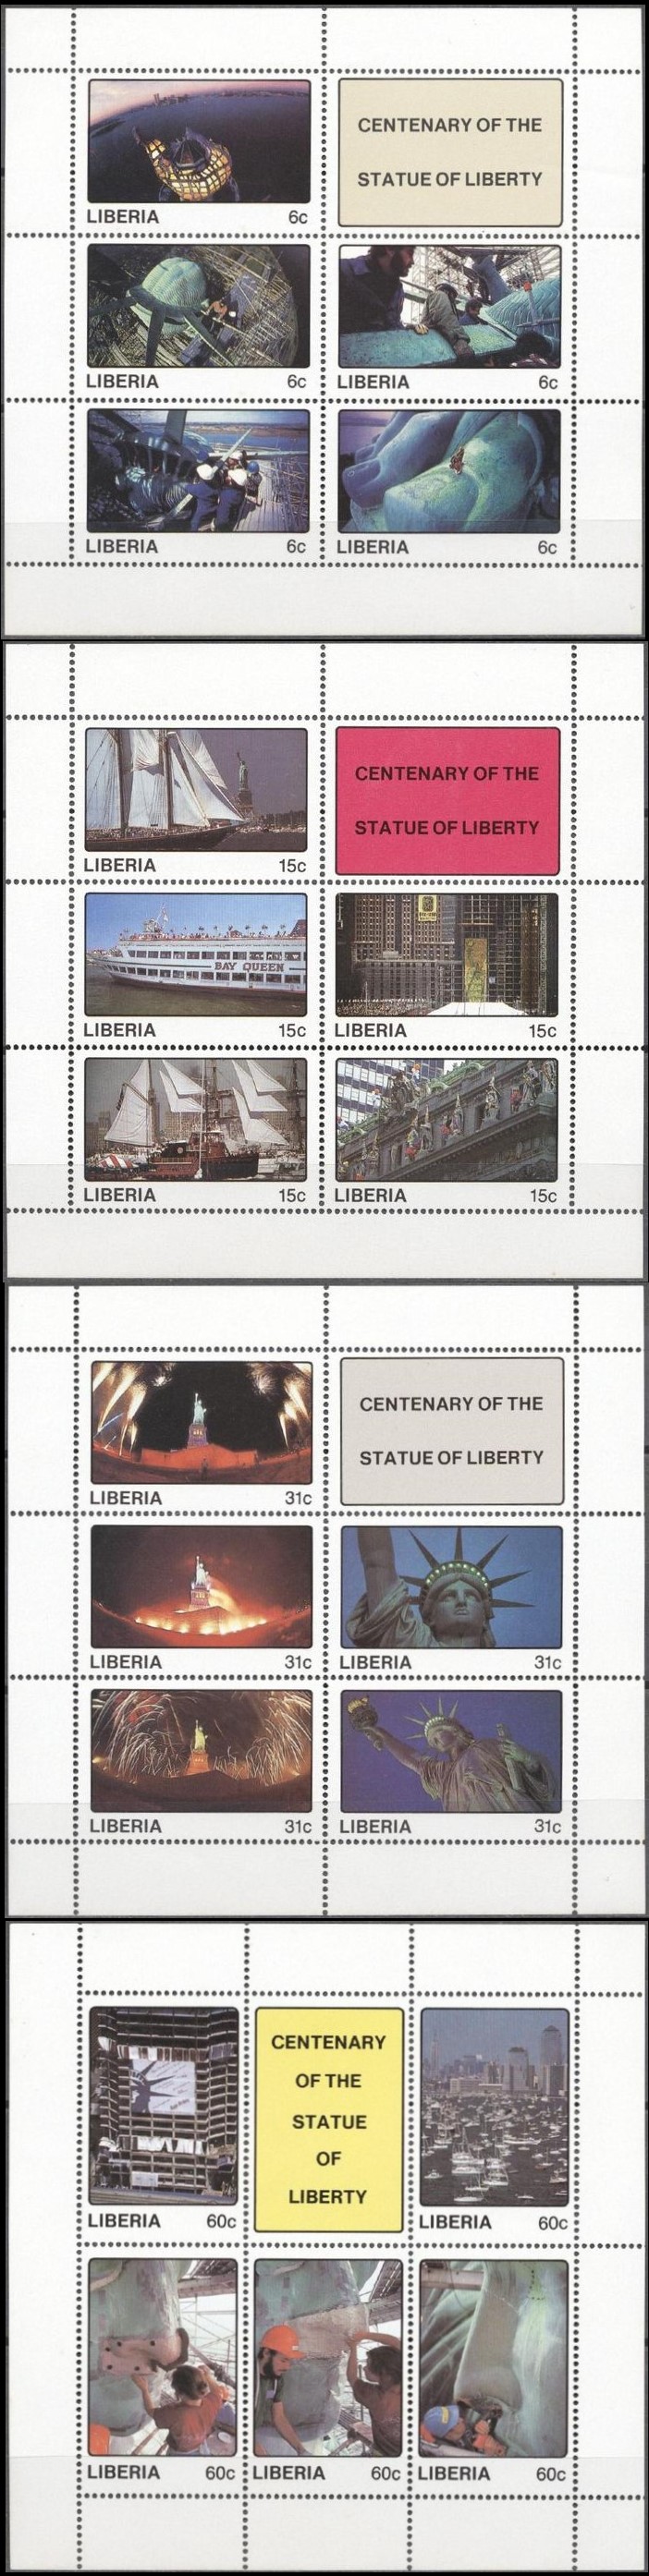 Liberia 1987 Centennial of the Statue of Liberty Stamp Sheetlets